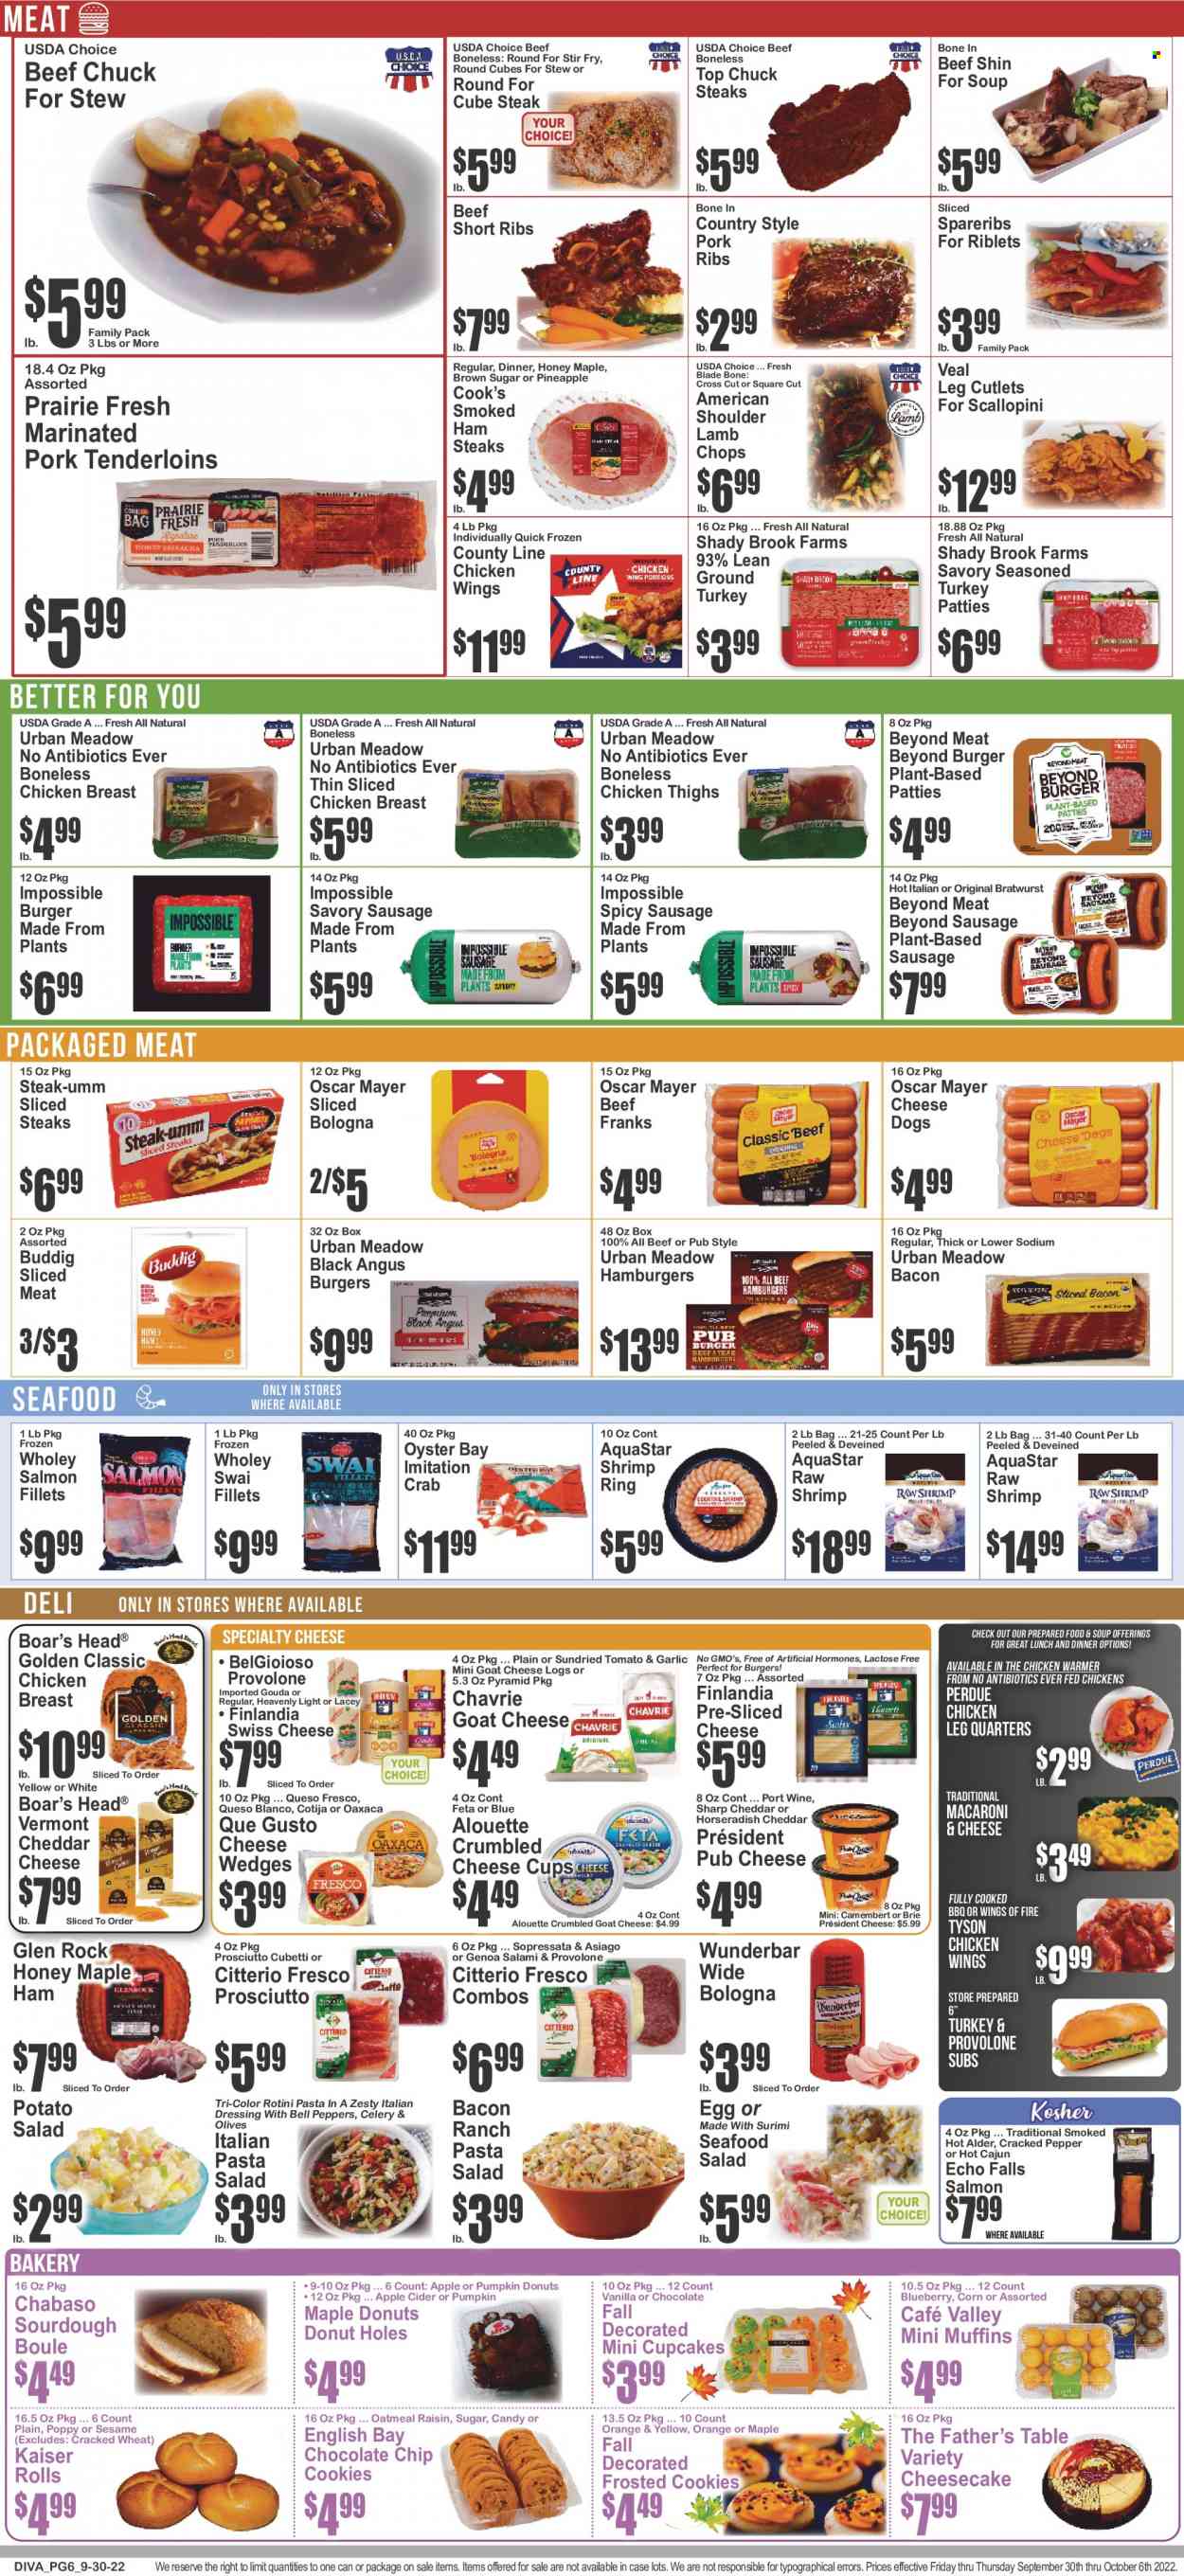 thumbnail - Key Food Flyer - 09/30/2022 - 10/06/2022 - Sales products - Father's Table, cupcake, donut holes, cheesecake, muffin, celery, corn, horseradish, pumpkin, salad, oranges, salmon, salmon fillet, oysters, seafood, crab, shrimps, swai fillet, macaroni & cheese, soup, hamburger, pasta, Perdue®, bacon, salami, ham, prosciutto, smoked ham, bologna sausage, Cook's, Oscar Mayer, bratwurst, sausage, potato salad, seafood salad, pasta salad, ham steaks, asiago, camembert, goat cheese, gouda, sliced cheese, swiss cheese, queso fresco, cheese cup, pub cheese, brie, Président, feta, Provolone, eggs, italian dressing, chicken wings, cookies, oatmeal, olives, dressing, honey, apple cider, port wine, cider, ground turkey, chicken breasts, chicken legs, chicken thighs, beef ribs, steak, pork meat, pork ribs, pork tenderloin, pork spare ribs, marinated pork, lamb chops, lamb meat, cup. Page 7.